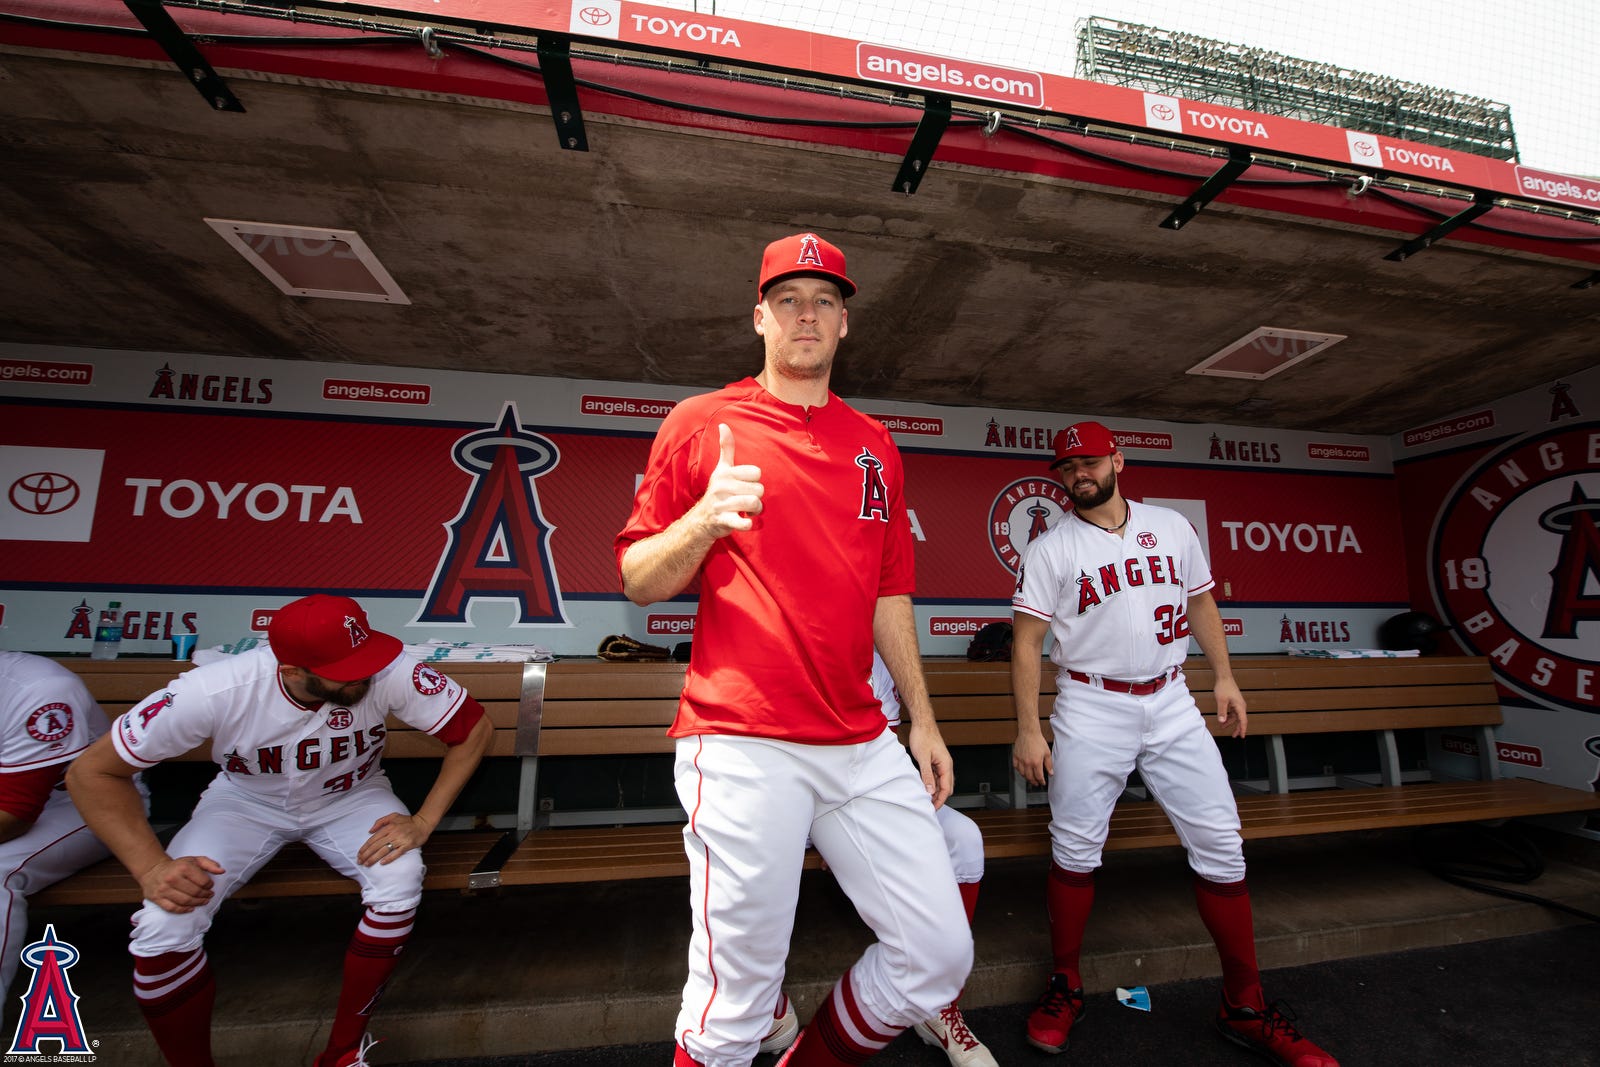 Game Gallery: Rays @ Angels, 9/13/19, by Angels Baseball